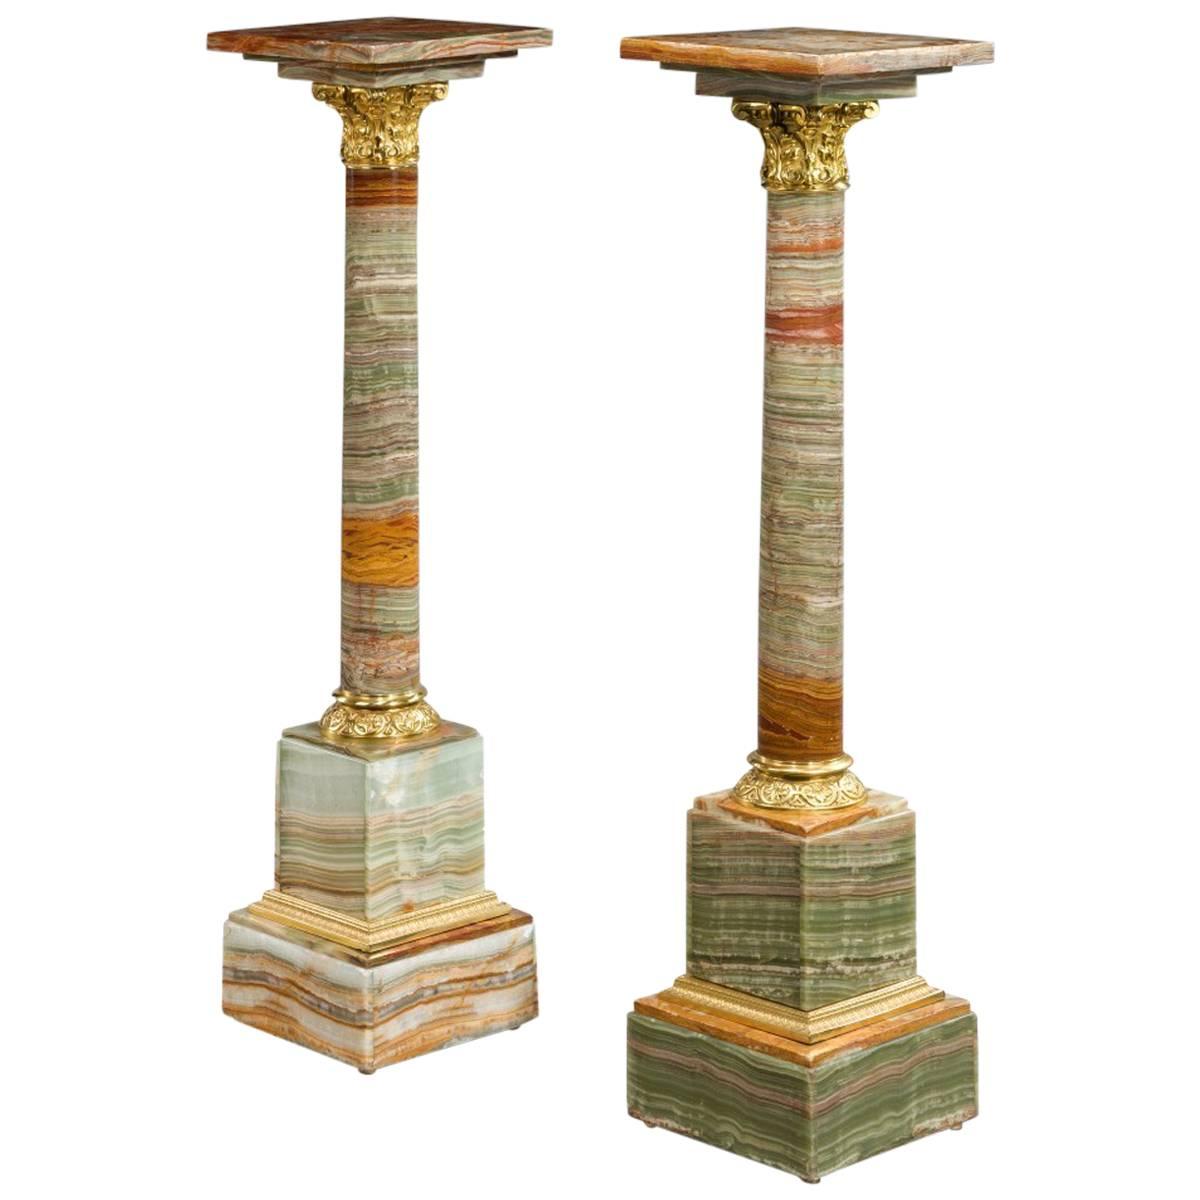 Pair of Amber Colored African Onyx Columns with Revolving Tops